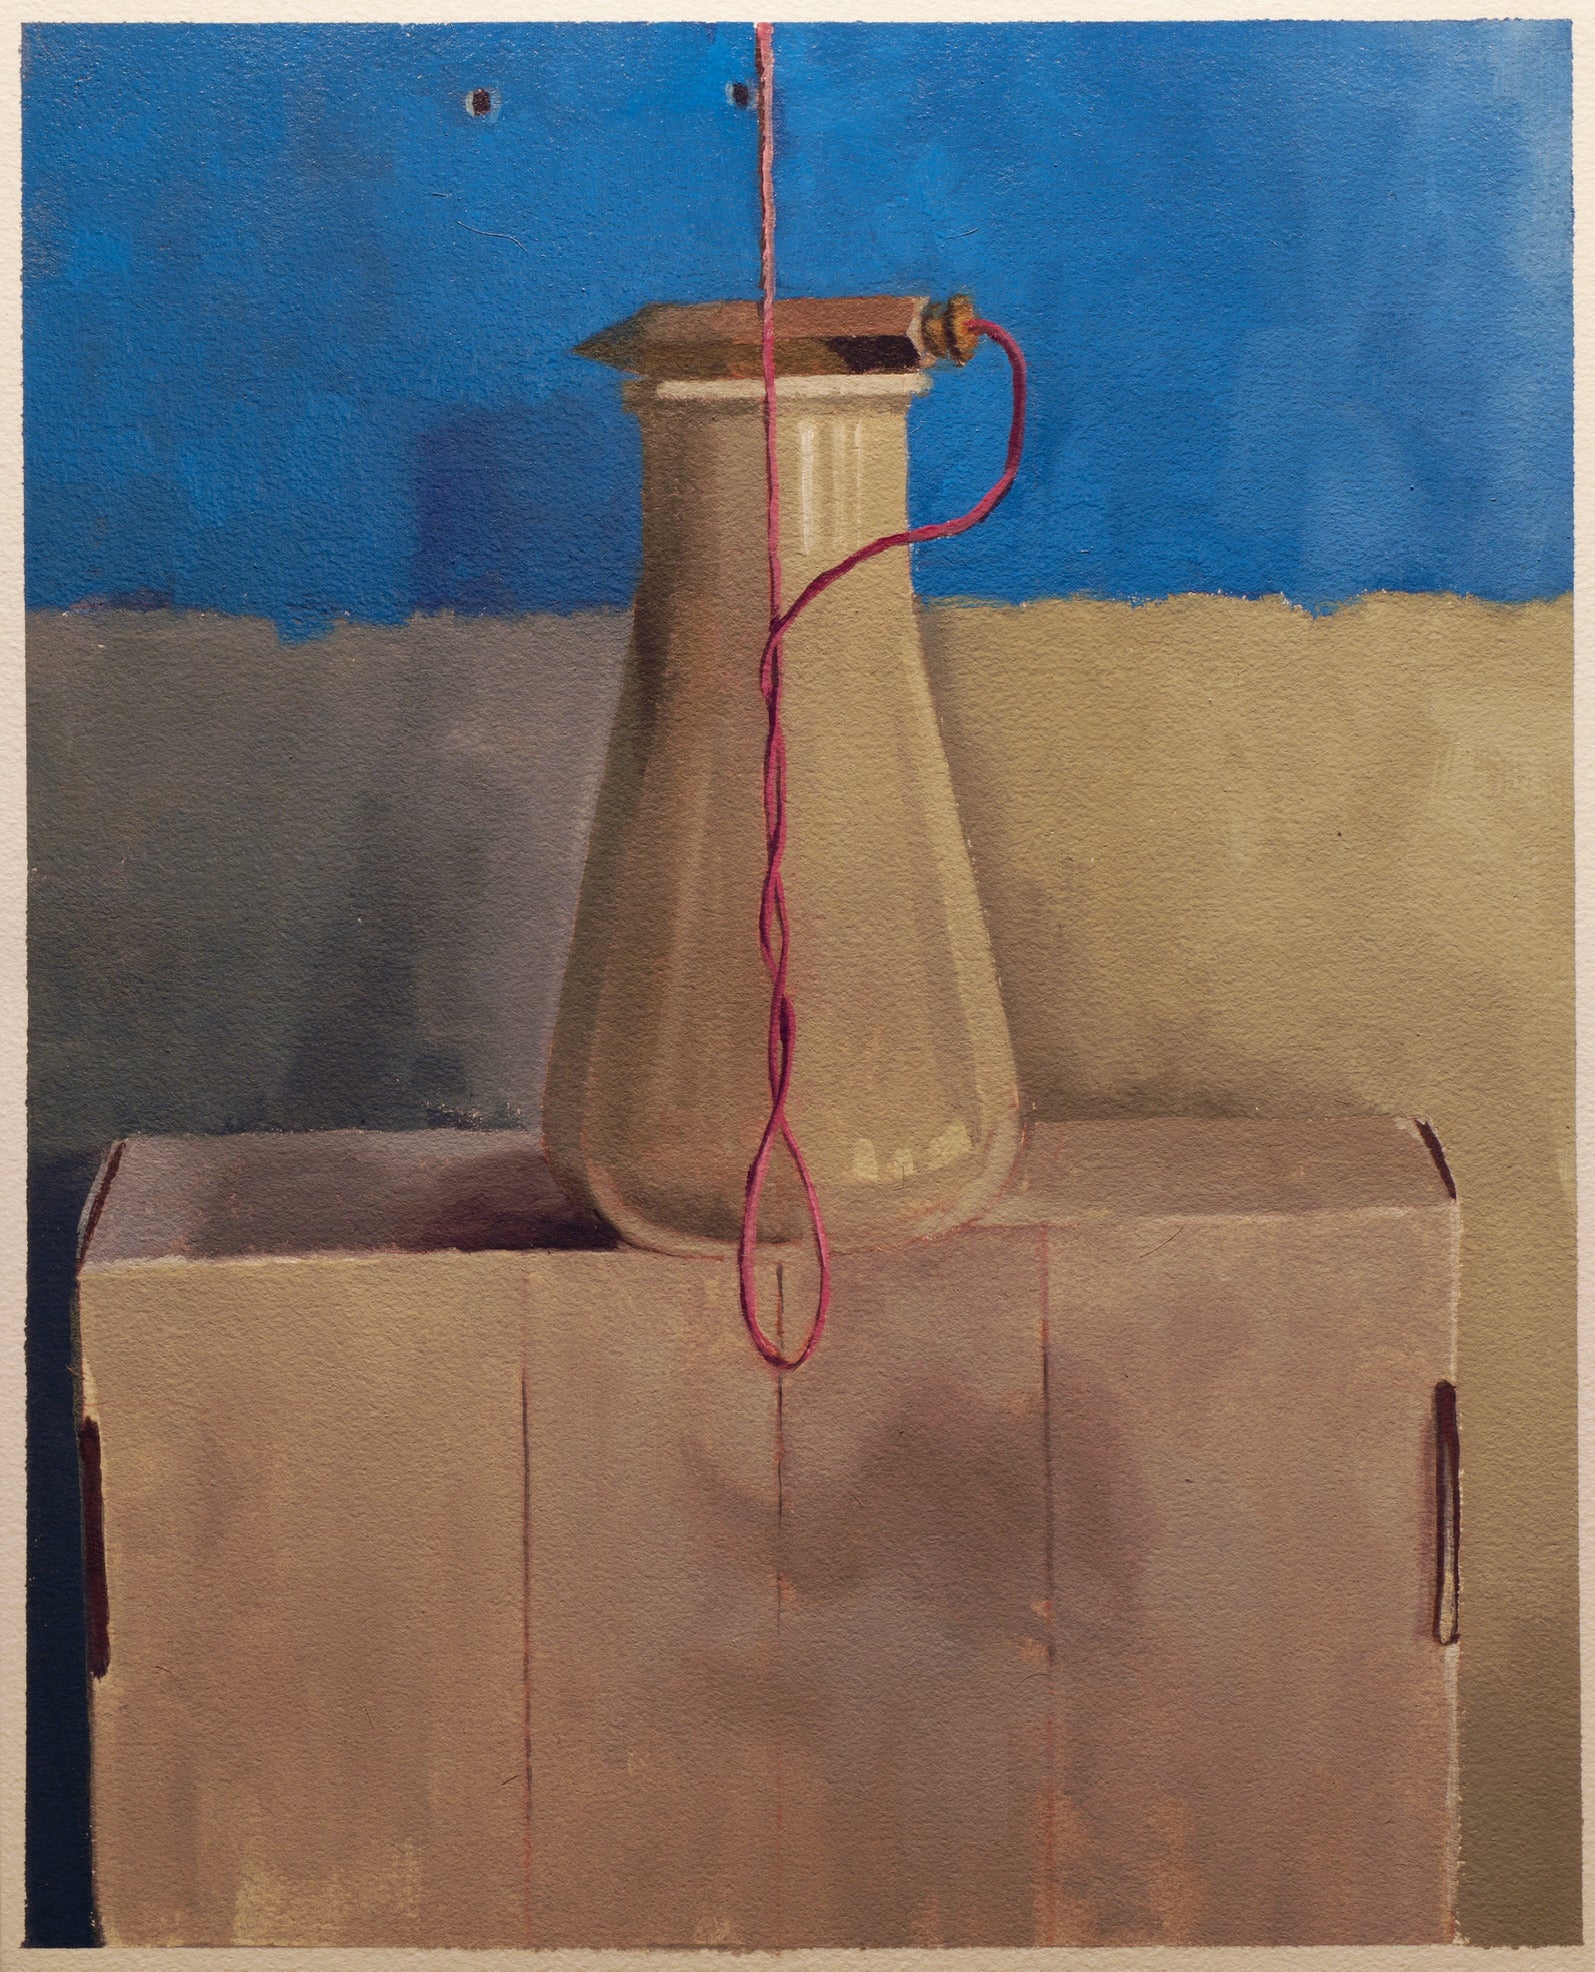 A plumb bob chilling atop an Erlenmeyer flask filled with plaster on a cardboard box